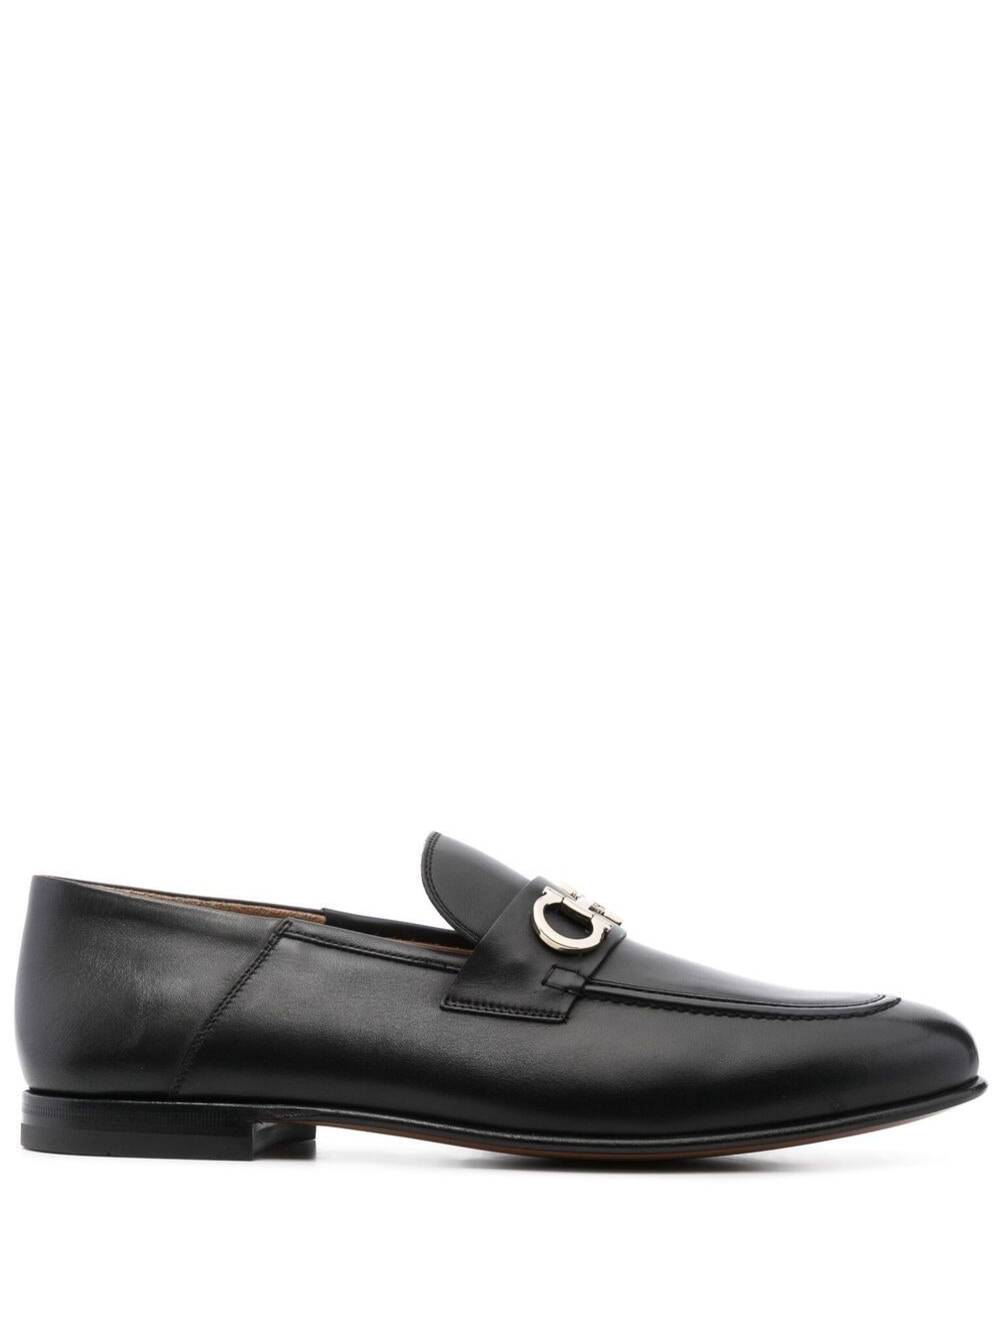 FERRAGAMO BLACK GIN LOAFERS WITH METAL LOGO PLACQUE AT THE FRONT IN CALF LEATHER MAN